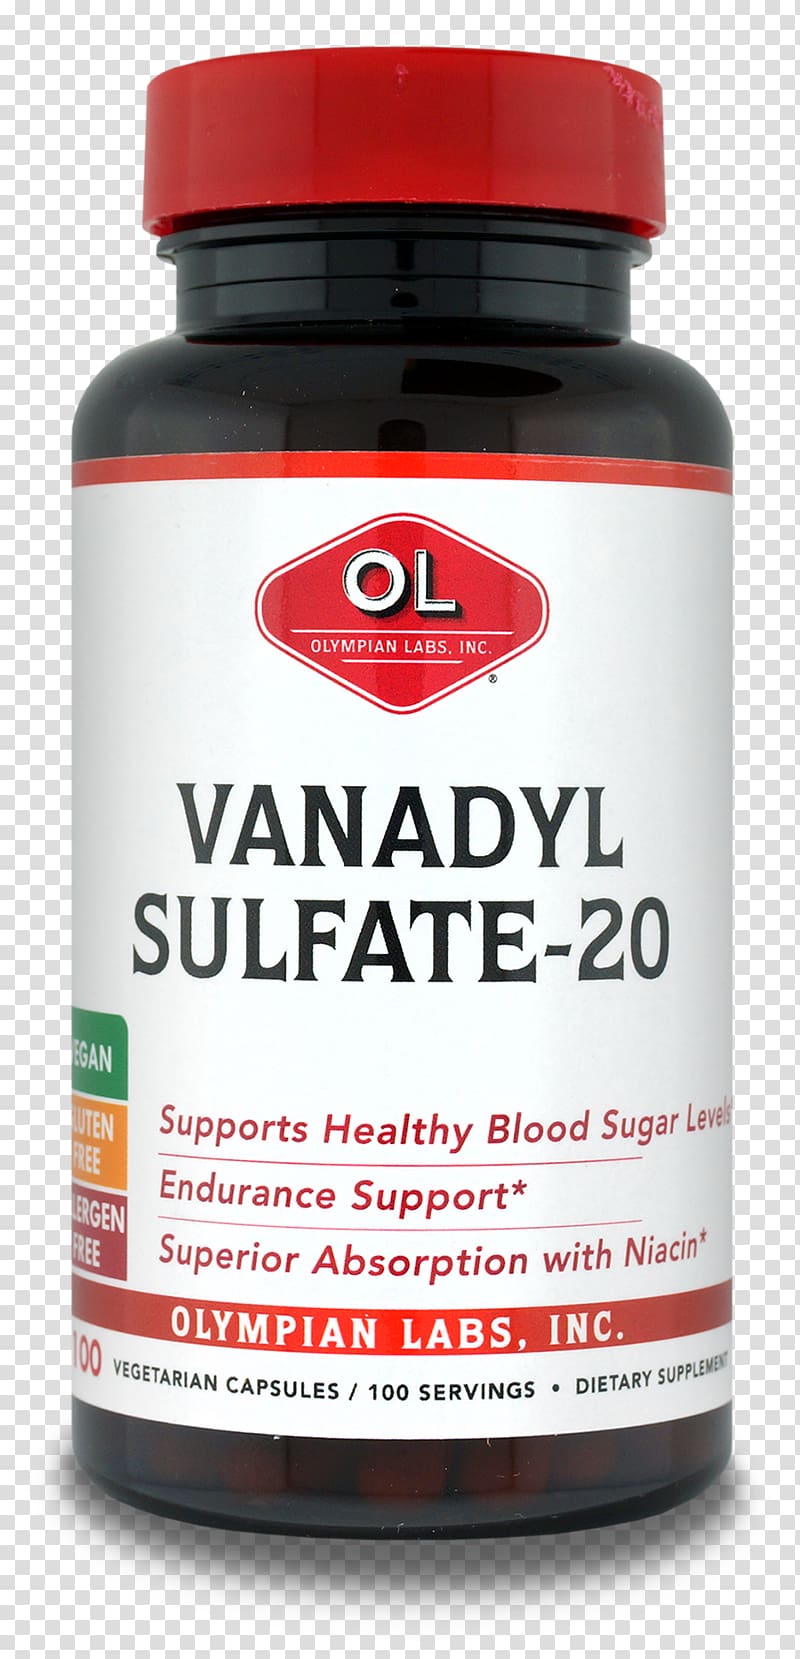 Vanadyl sulfate Dietary supplement Vanadyl ion Olympian Labs, Inc., others transparent background PNG clipart